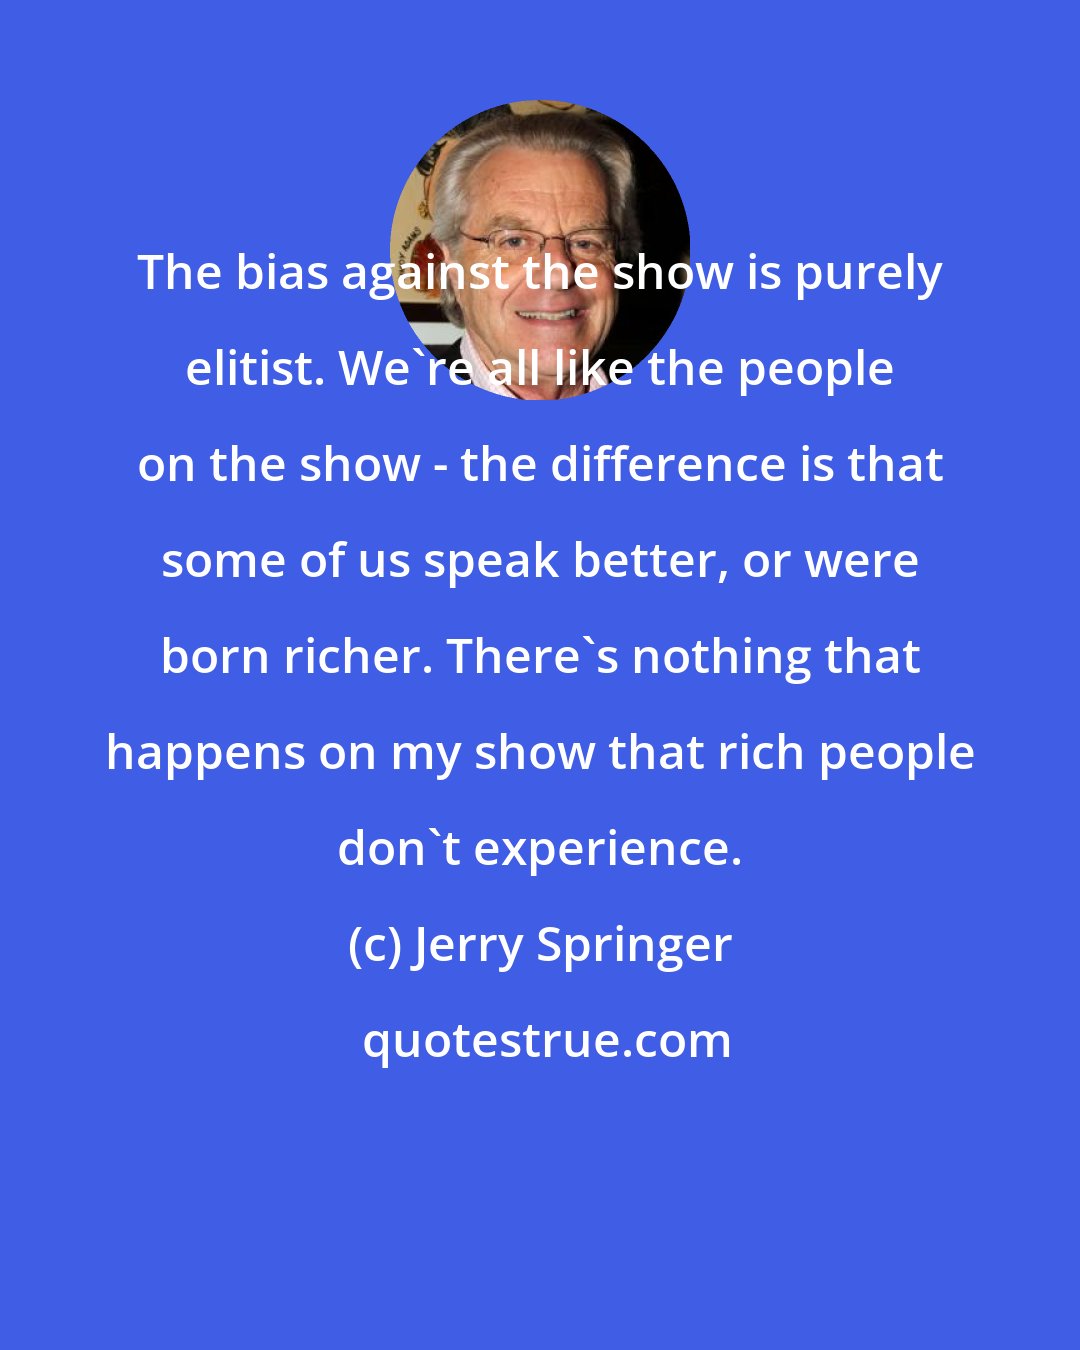 Jerry Springer: The bias against the show is purely elitist. We're all like the people on the show - the difference is that some of us speak better, or were born richer. There's nothing that happens on my show that rich people don't experience.